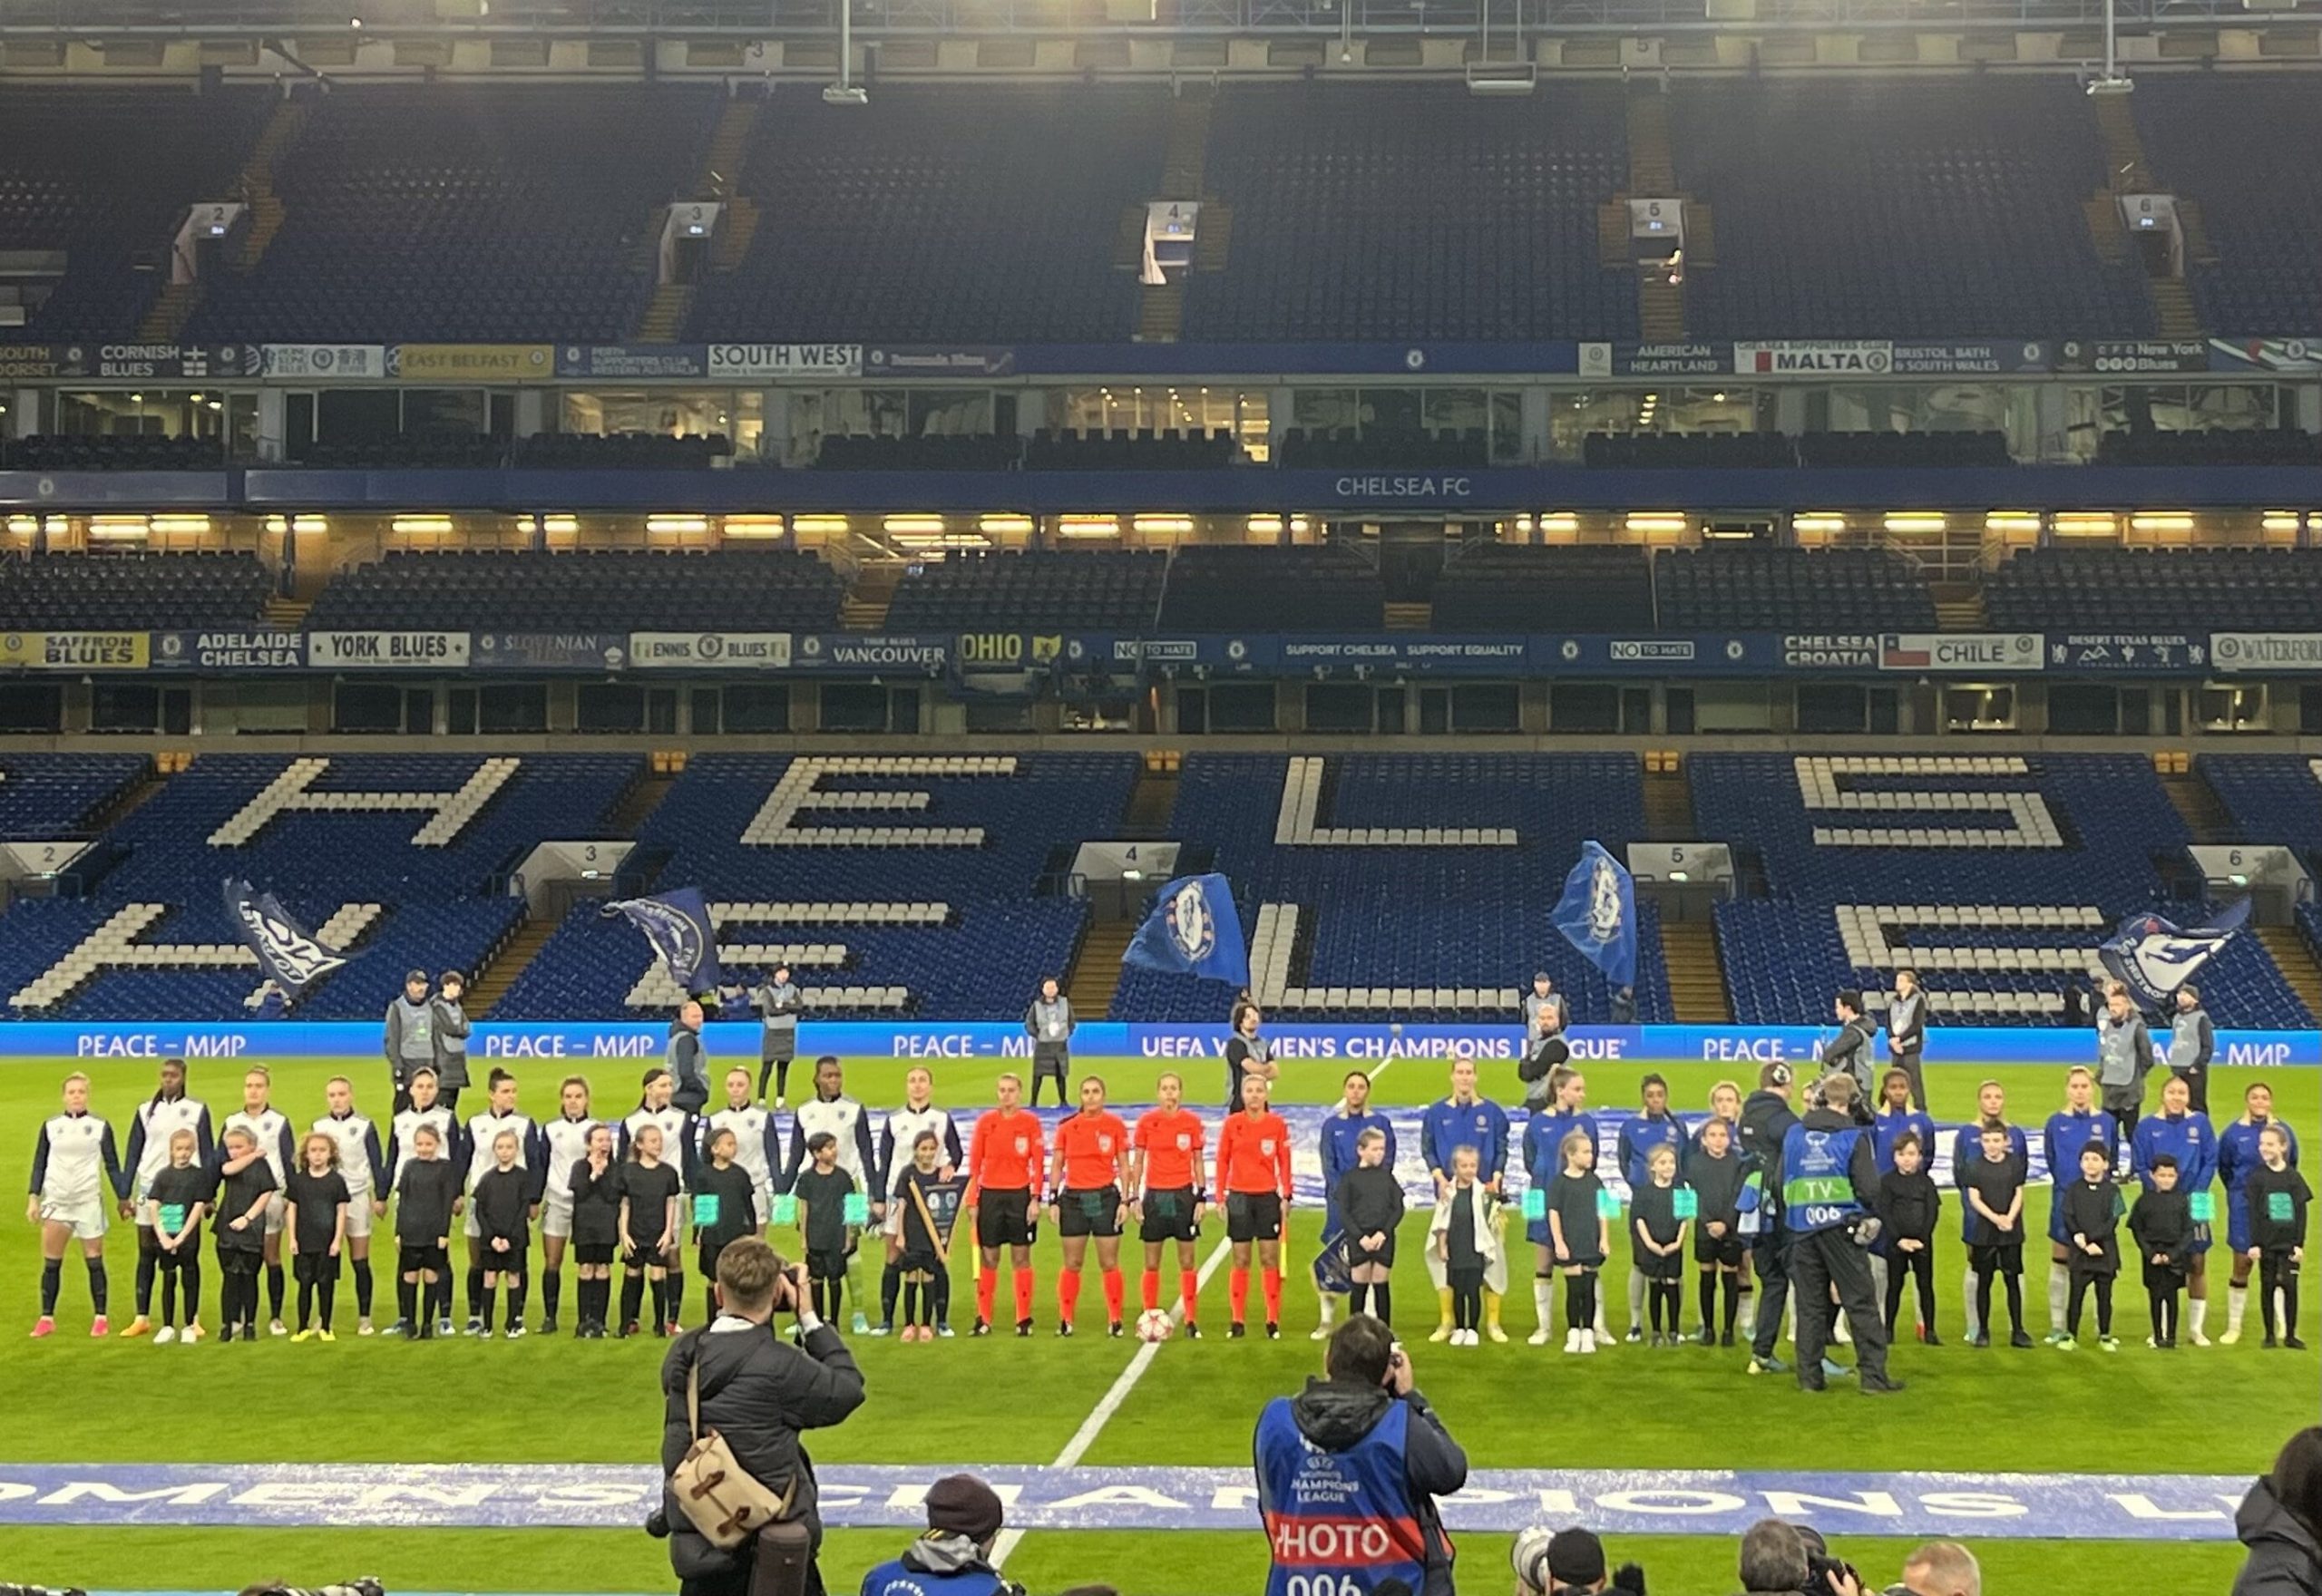 Chelsea Women and Paris FC line up ready for kick off ahead of their Champions League clash at Stamford Bridge on Thursday, November 23. Photo: Caitlin Hamill.